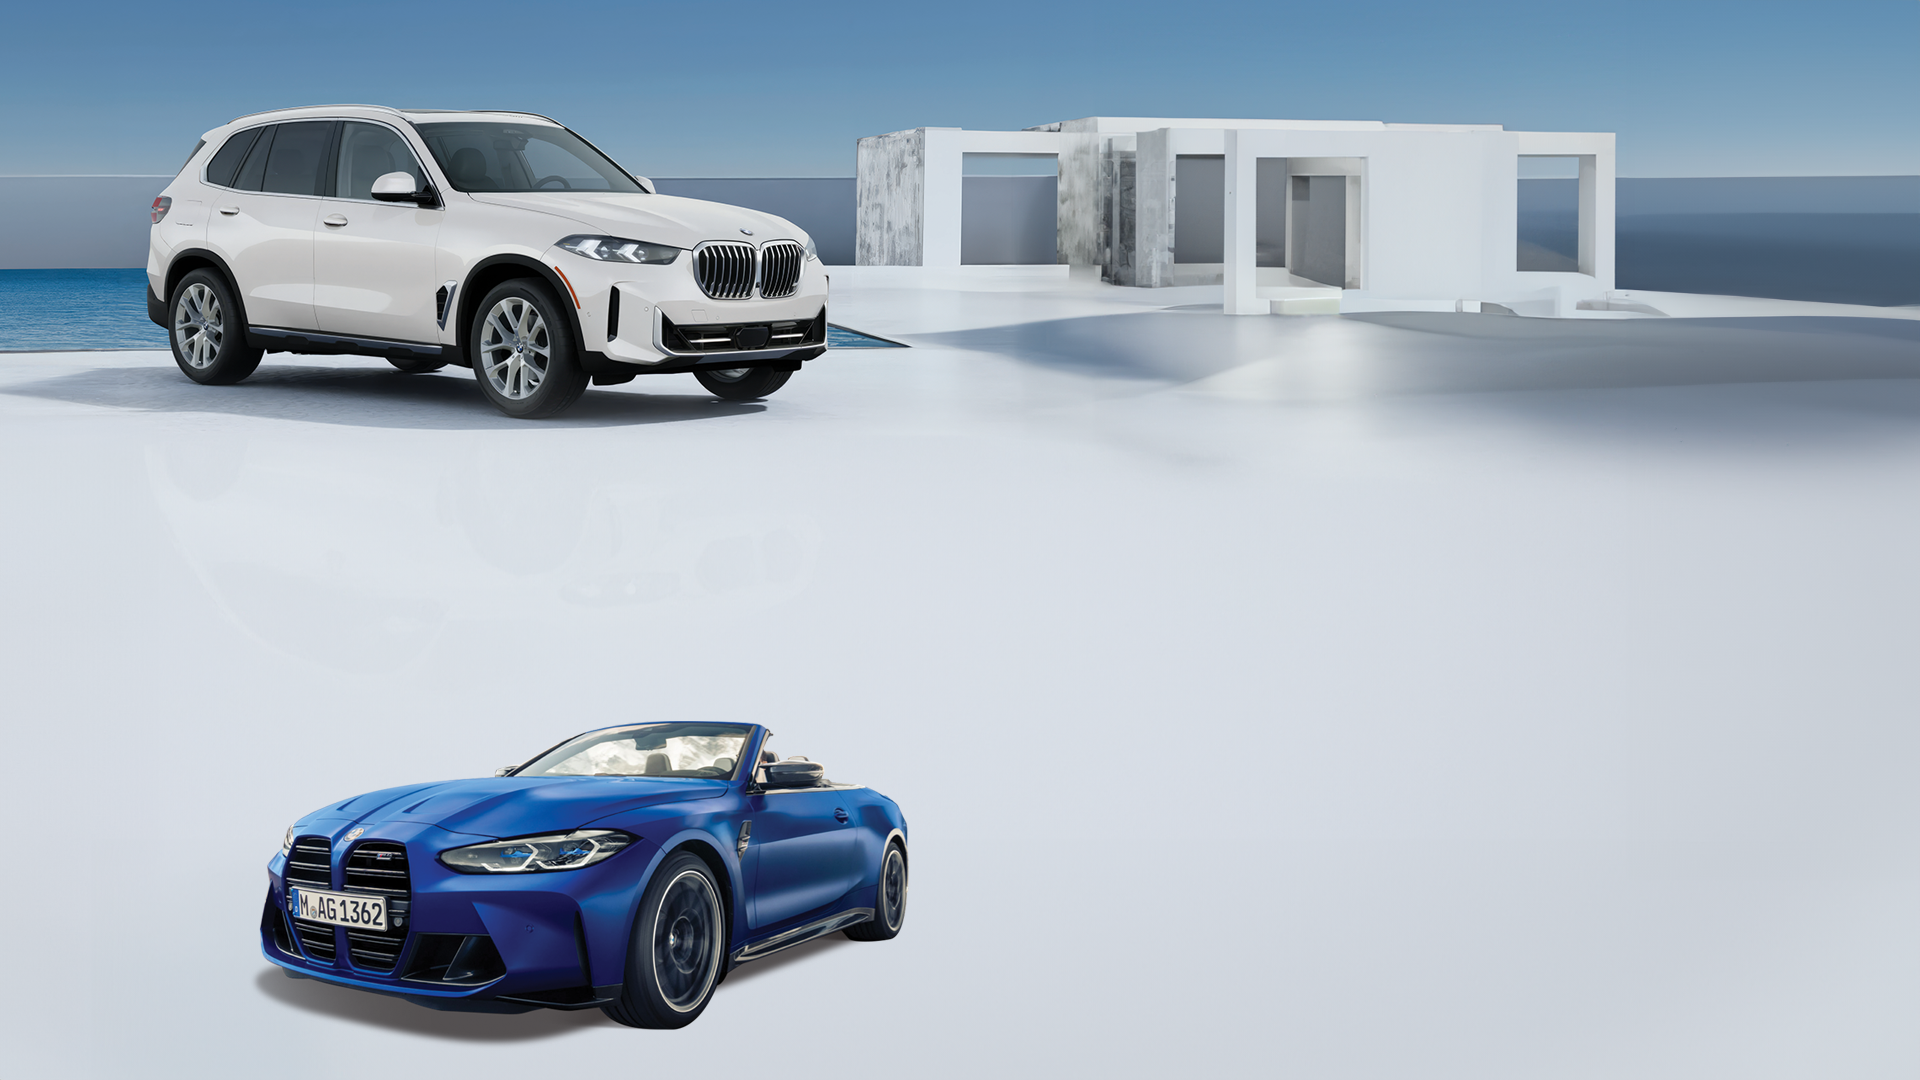 image of BMW X5 and BMW M4.